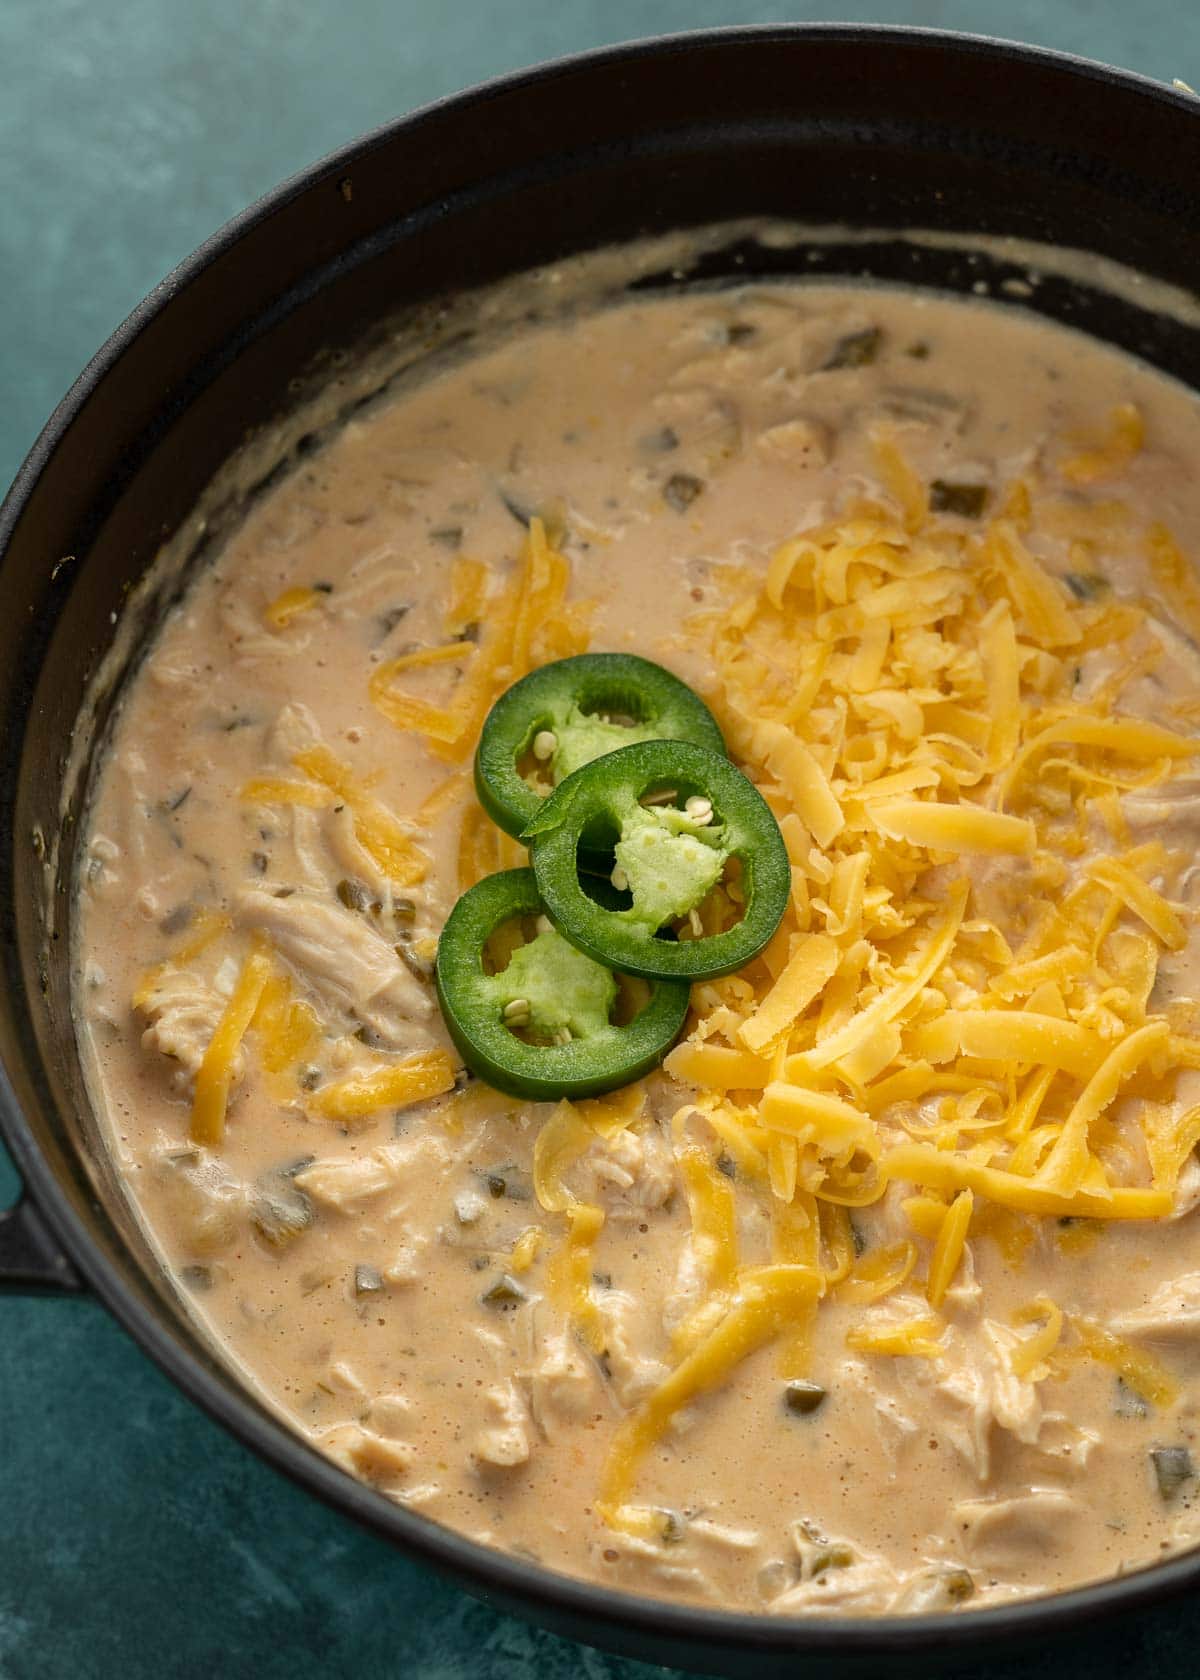 This Cheesy Jalapeno Chicken Soup has all the flavor of a jalapeno popper but in a creamy, hearty soup! Enjoy a serving of this keto-friendly soup for about 6 net carbs!